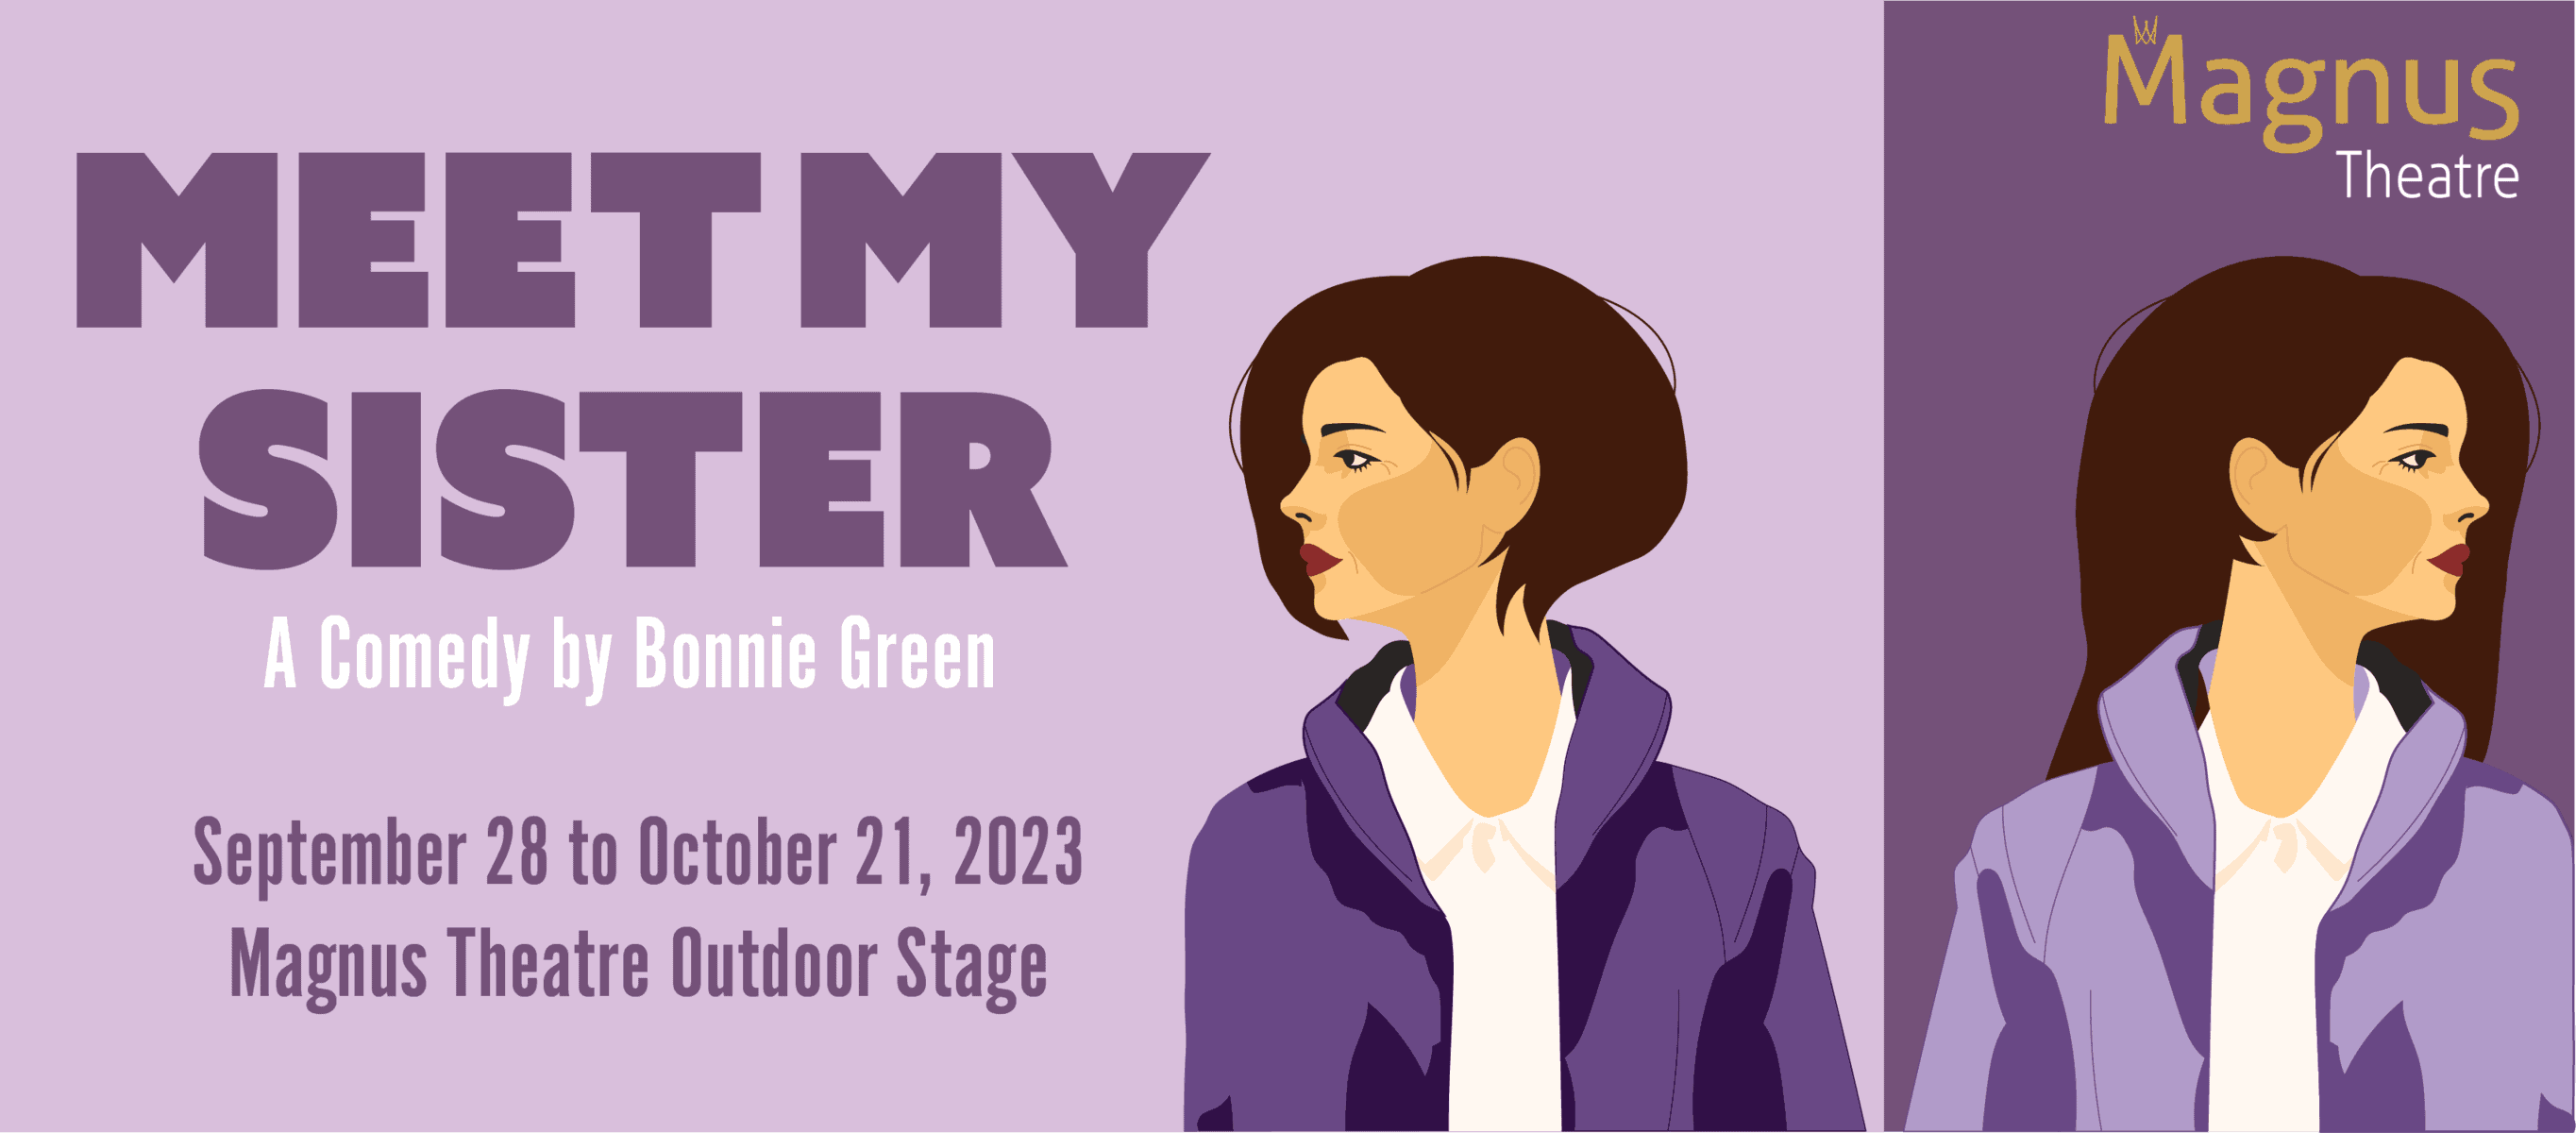 A hilarious Canadian play about sibling rivalry, aging parents and childhood memories, written by Bonnie
Green (Dock Spider). Sisters, Blanche and Stella could not be more different but they must join forces
when Mom, who is scheduled to move to a Long Term Care Facility, locks herself in her home and refuses to go.
